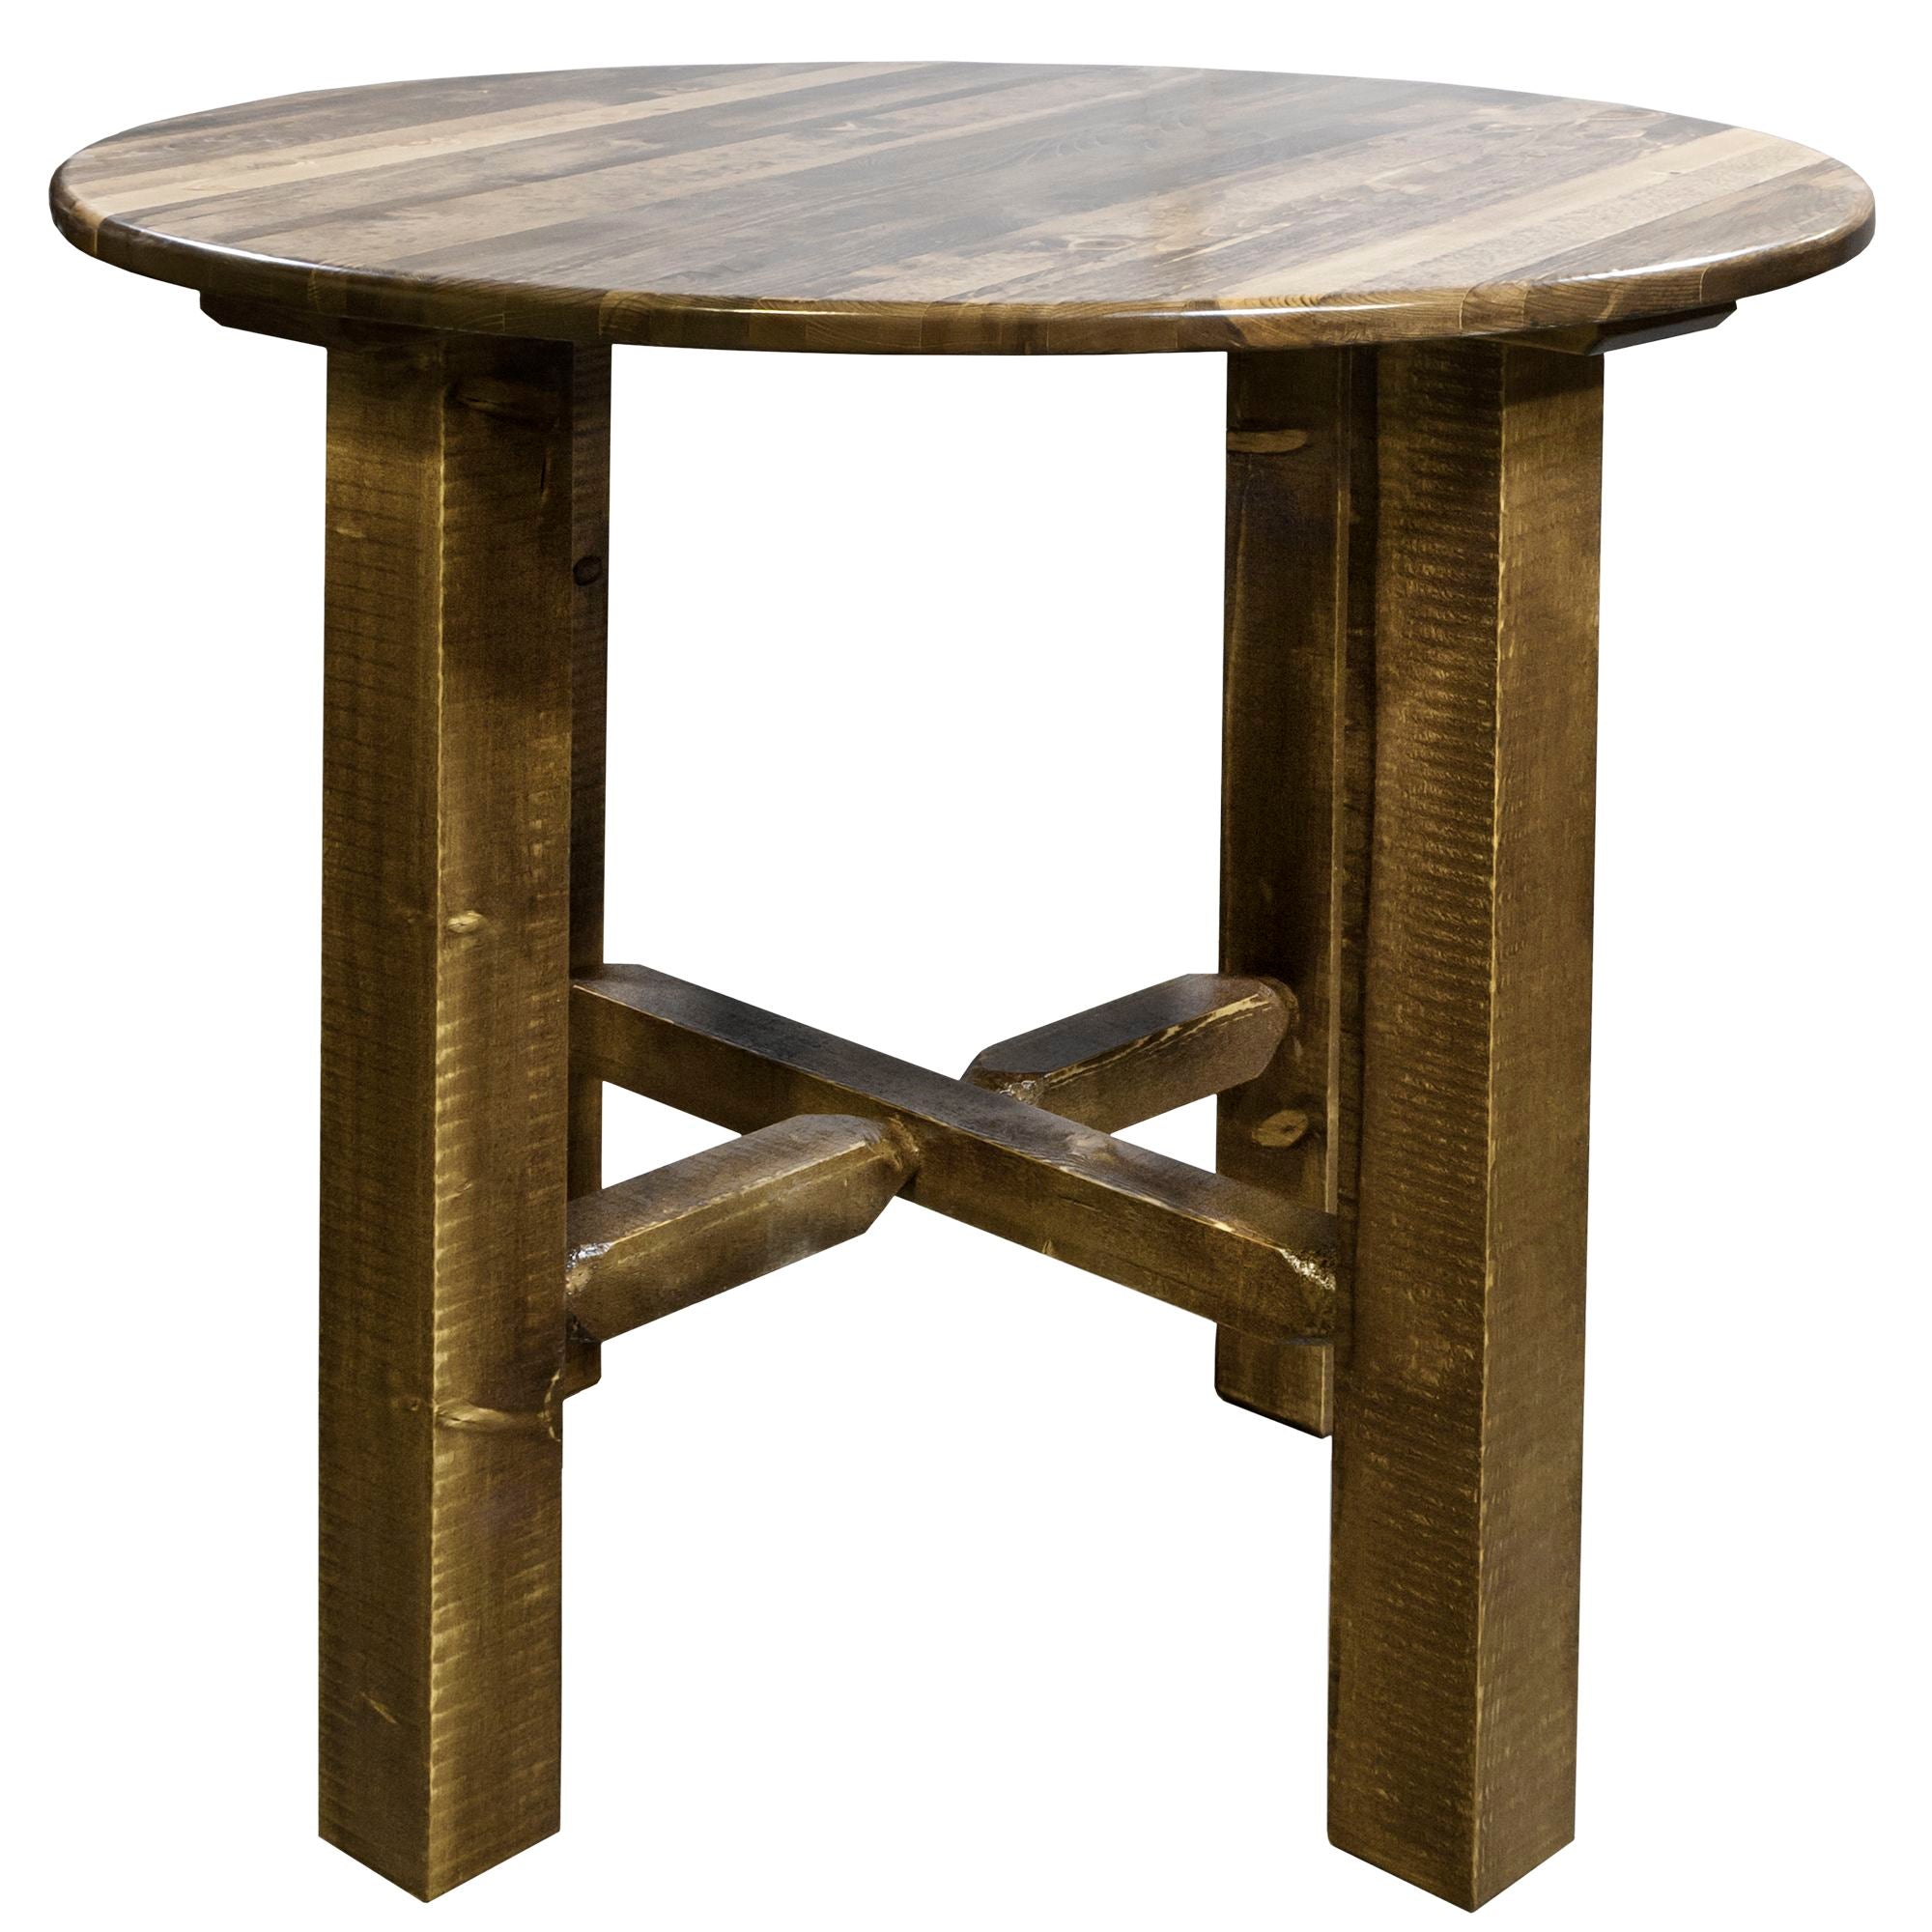 The Montana Glacier Country Collection MWGCBT Bistro Table Stain Lacquered